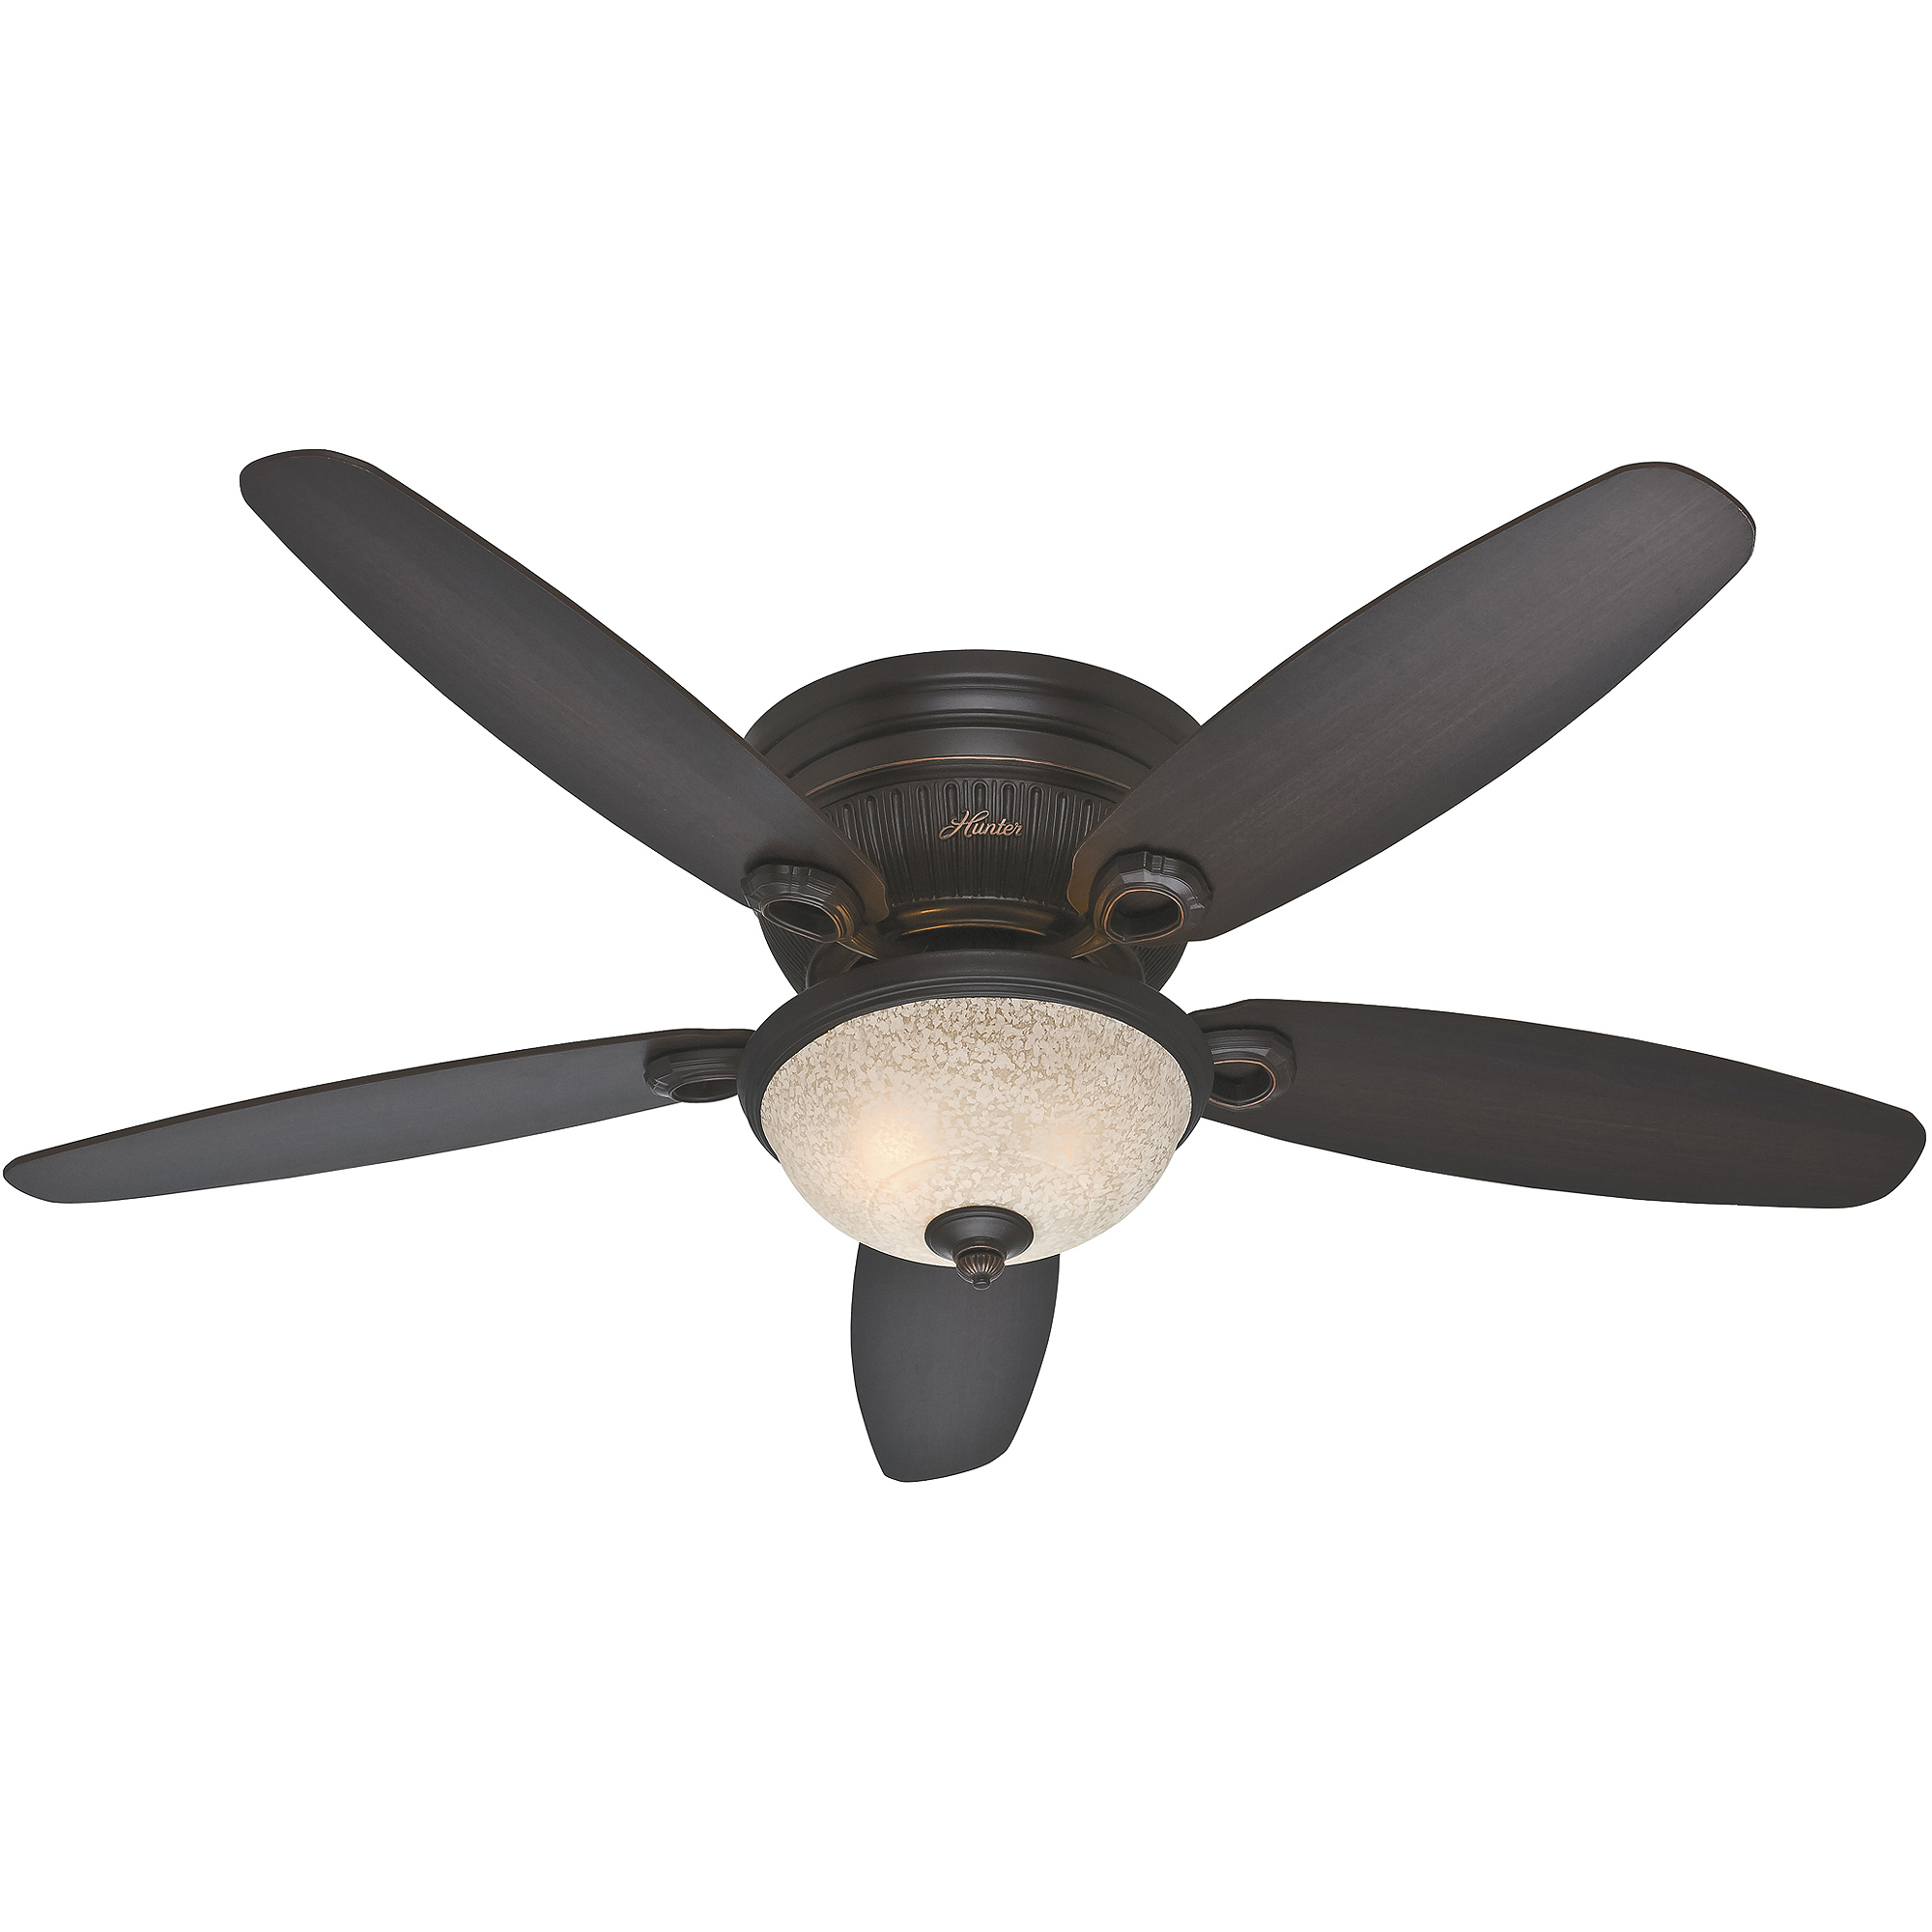 52″ Ashmont Onyx ceiling fan for $80